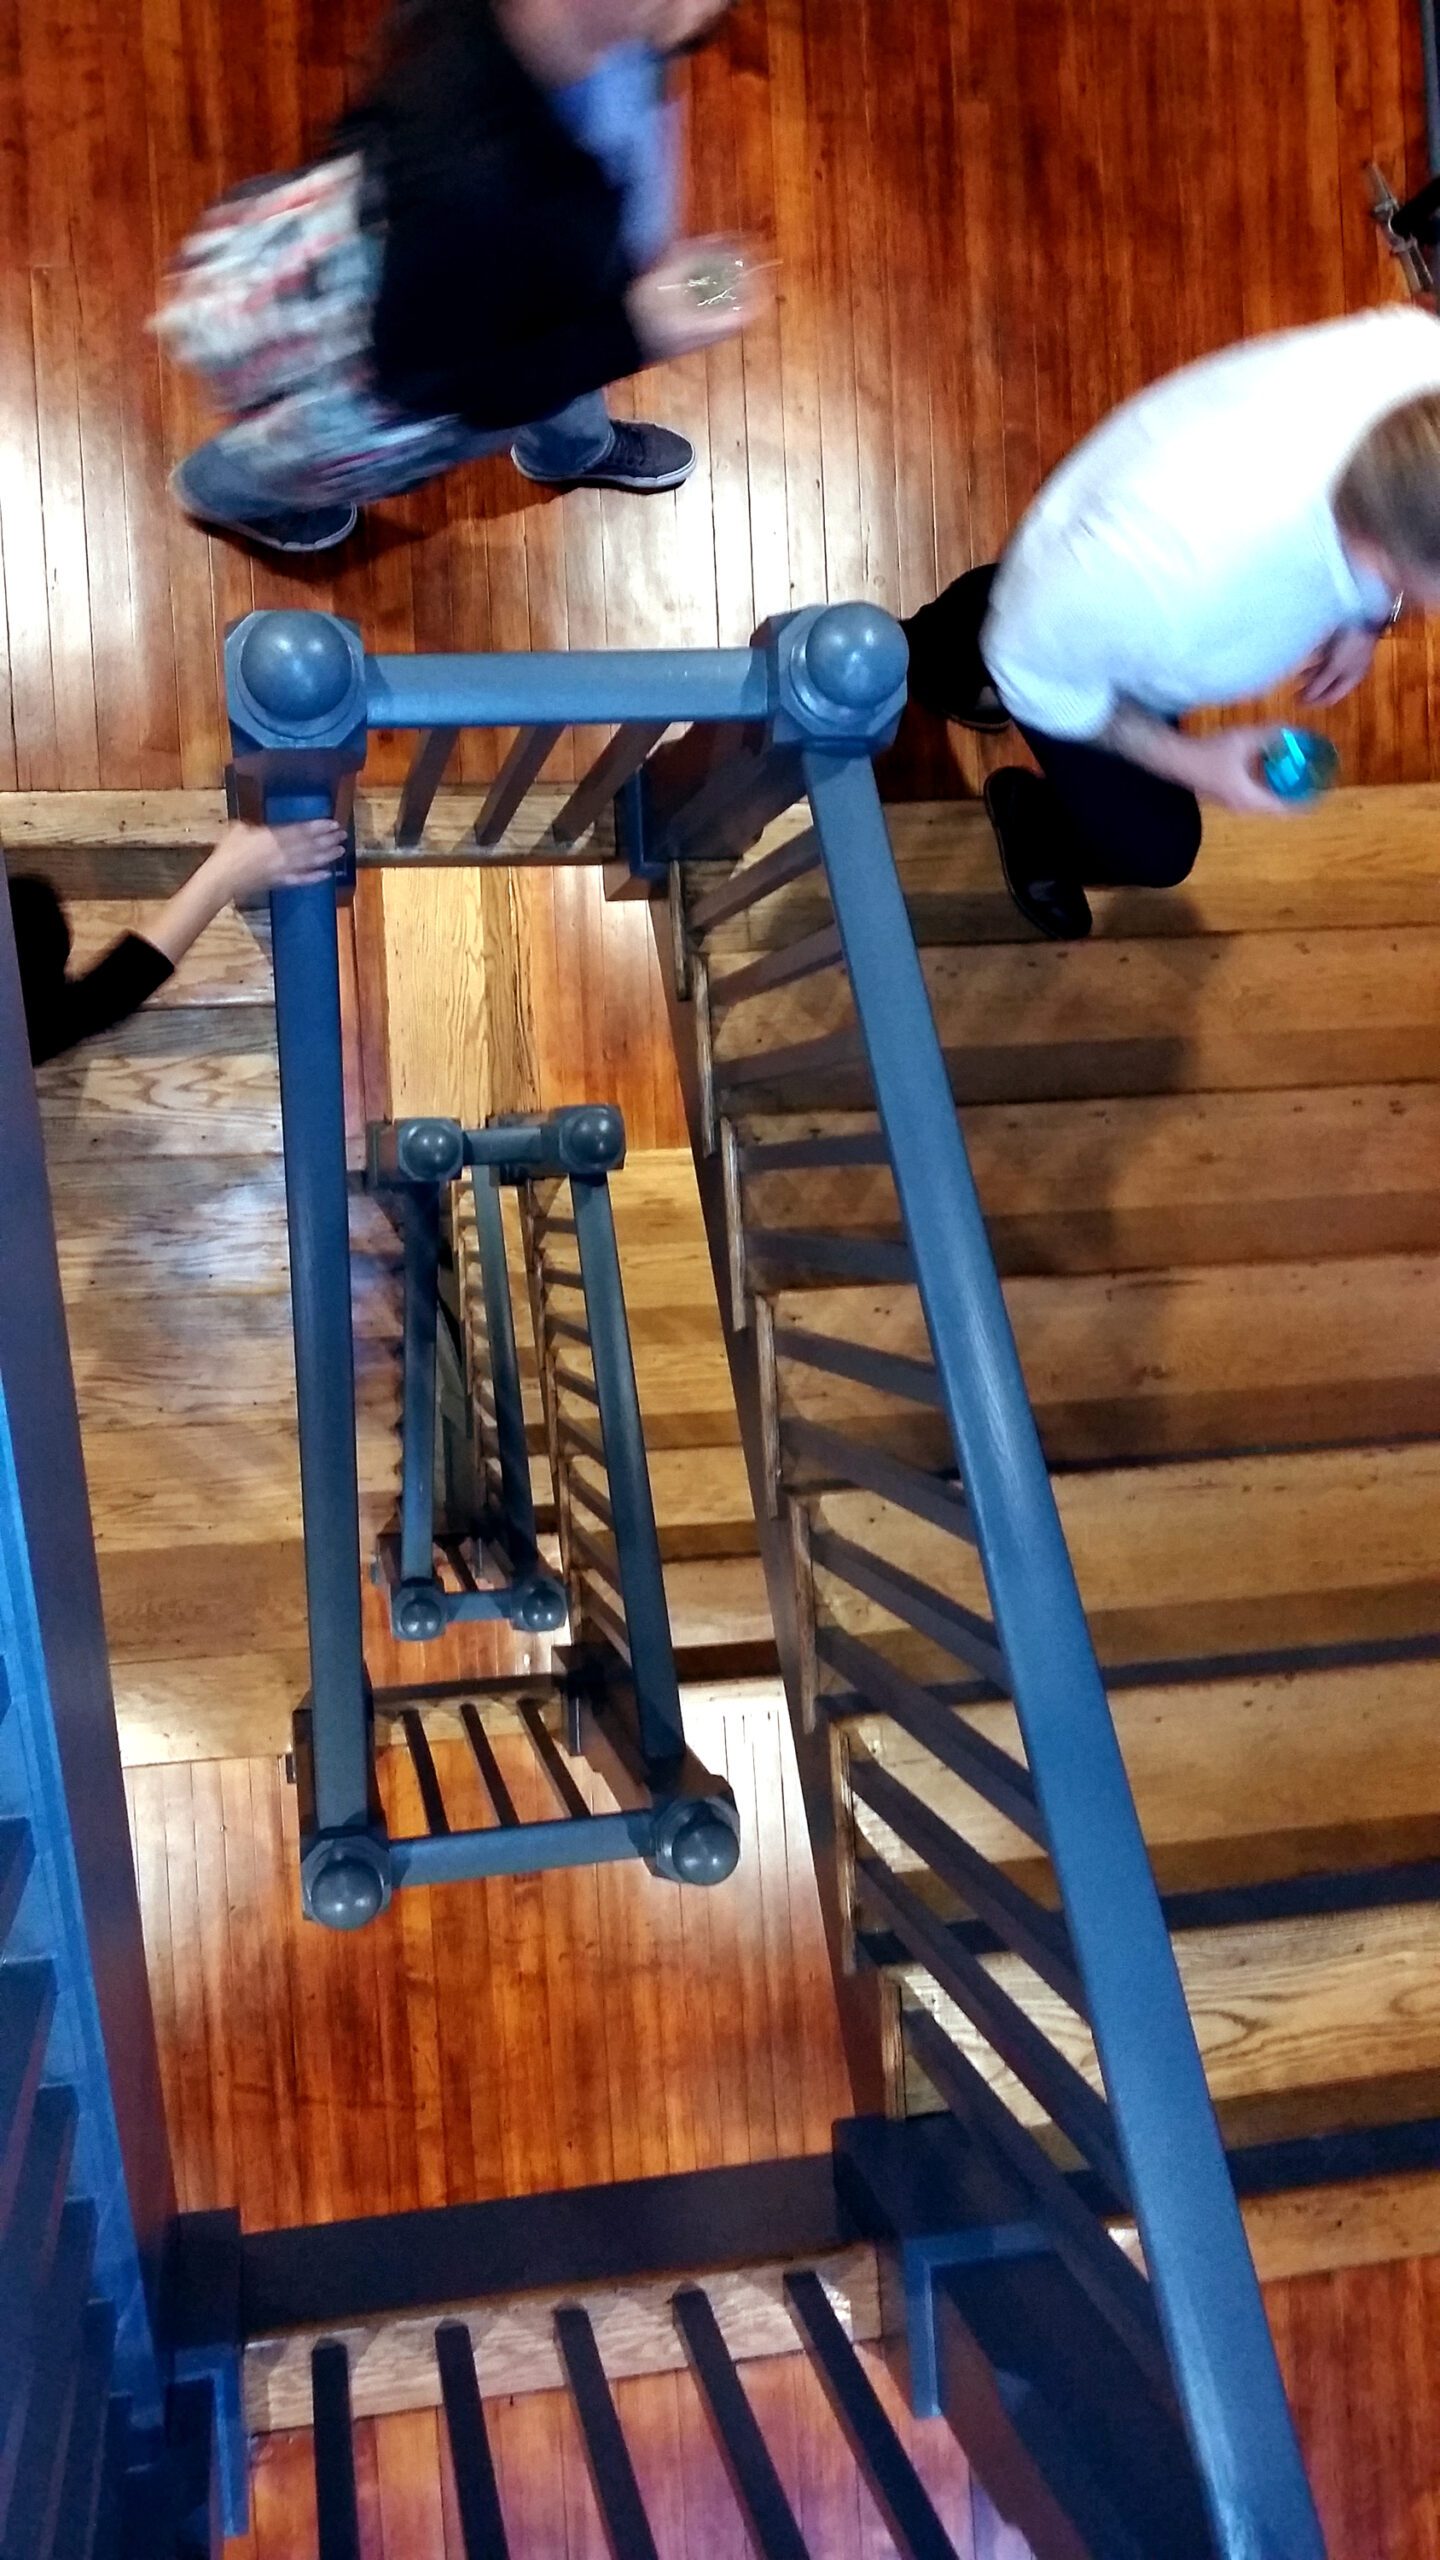 The original main staircase was repaired and refinished, then extended up to the third floor.